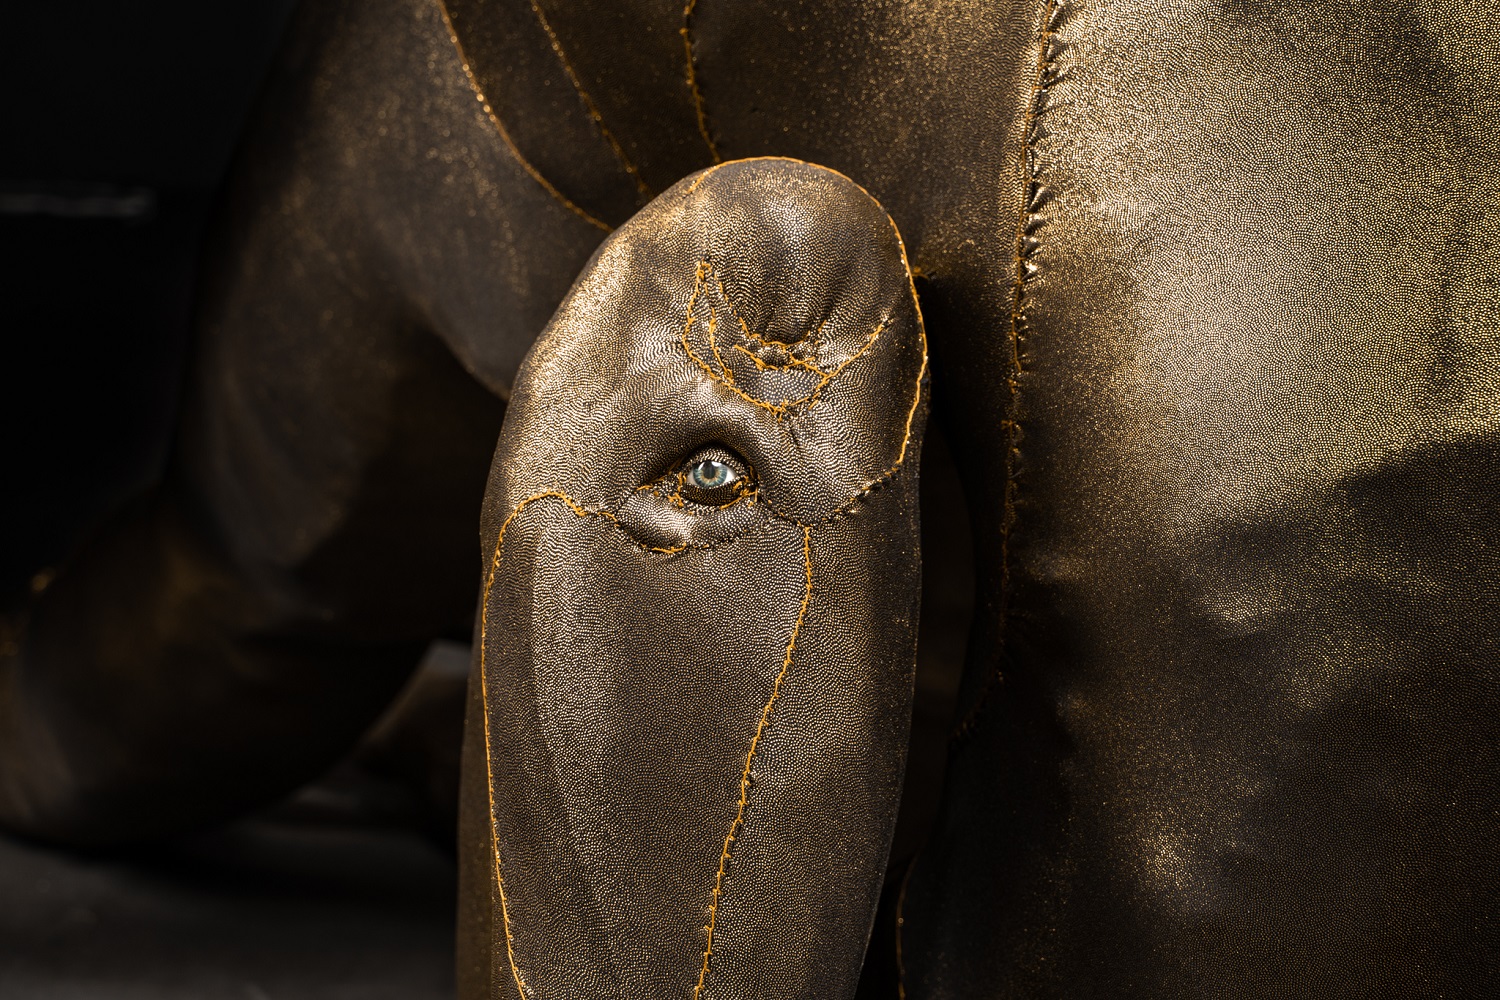 Tarryn Gill, Limber (1), 2020, mixed media, including hand-stitched Lycra, EPE foam and fibre fill, artificial eyes, steel, dimensions 1.1m x 3.7m x 1.25m. Courtesy of the artist and Gallery Sally-Dan Cuthbert. Photograph by Pixel Poetry